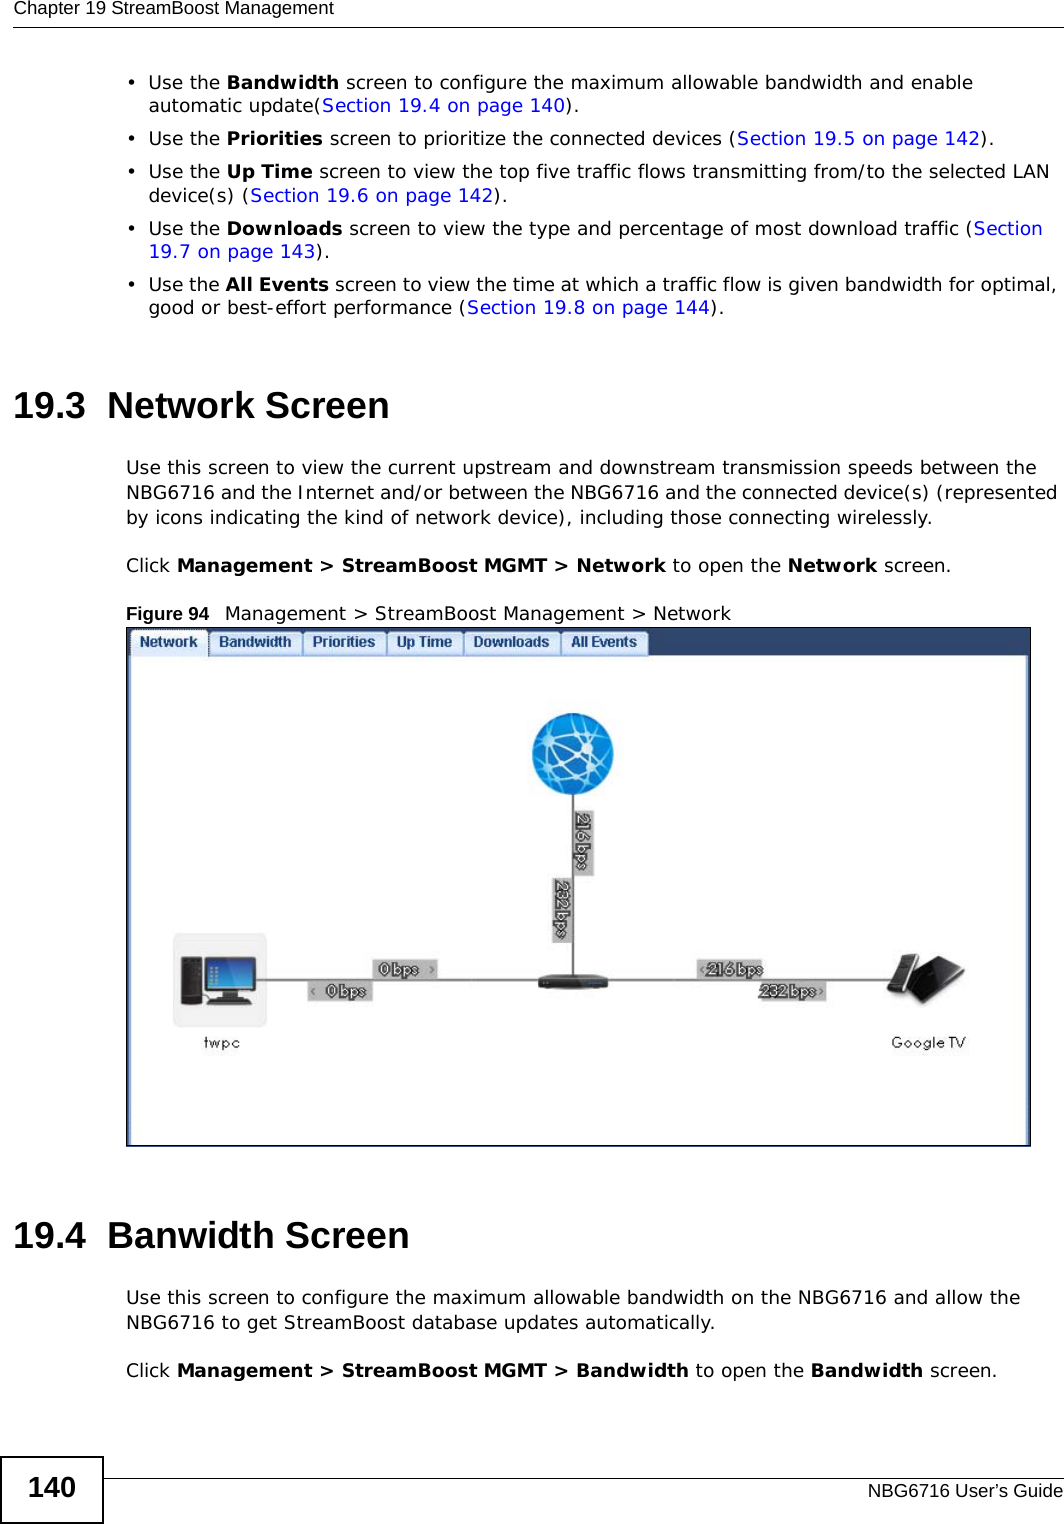 Chapter 19 StreamBoost ManagementNBG6716 User’s Guide140•Use the Bandwidth screen to configure the maximum allowable bandwidth and enable automatic update(Section 19.4 on page 140).•Use the Priorities screen to prioritize the connected devices (Section 19.5 on page 142).•Use the Up Time screen to view the top five traffic flows transmitting from/to the selected LAN device(s) (Section 19.6 on page 142).•Use the Downloads screen to view the type and percentage of most download traffic (Section 19.7 on page 143).•Use the All Events screen to view the time at which a traffic flow is given bandwidth for optimal, good or best-effort performance (Section 19.8 on page 144).19.3  Network Screen Use this screen to view the current upstream and downstream transmission speeds between the NBG6716 and the Internet and/or between the NBG6716 and the connected device(s) (represented by icons indicating the kind of network device), including those connecting wirelessly.Click Management &gt; StreamBoost MGMT &gt; Network to open the Network screen.Figure 94   Management &gt; StreamBoost Management &gt; Network   19.4  Banwidth ScreenUse this screen to configure the maximum allowable bandwidth on the NBG6716 and allow the NBG6716 to get StreamBoost database updates automatically.Click Management &gt; StreamBoost MGMT &gt; Bandwidth to open the Bandwidth screen.